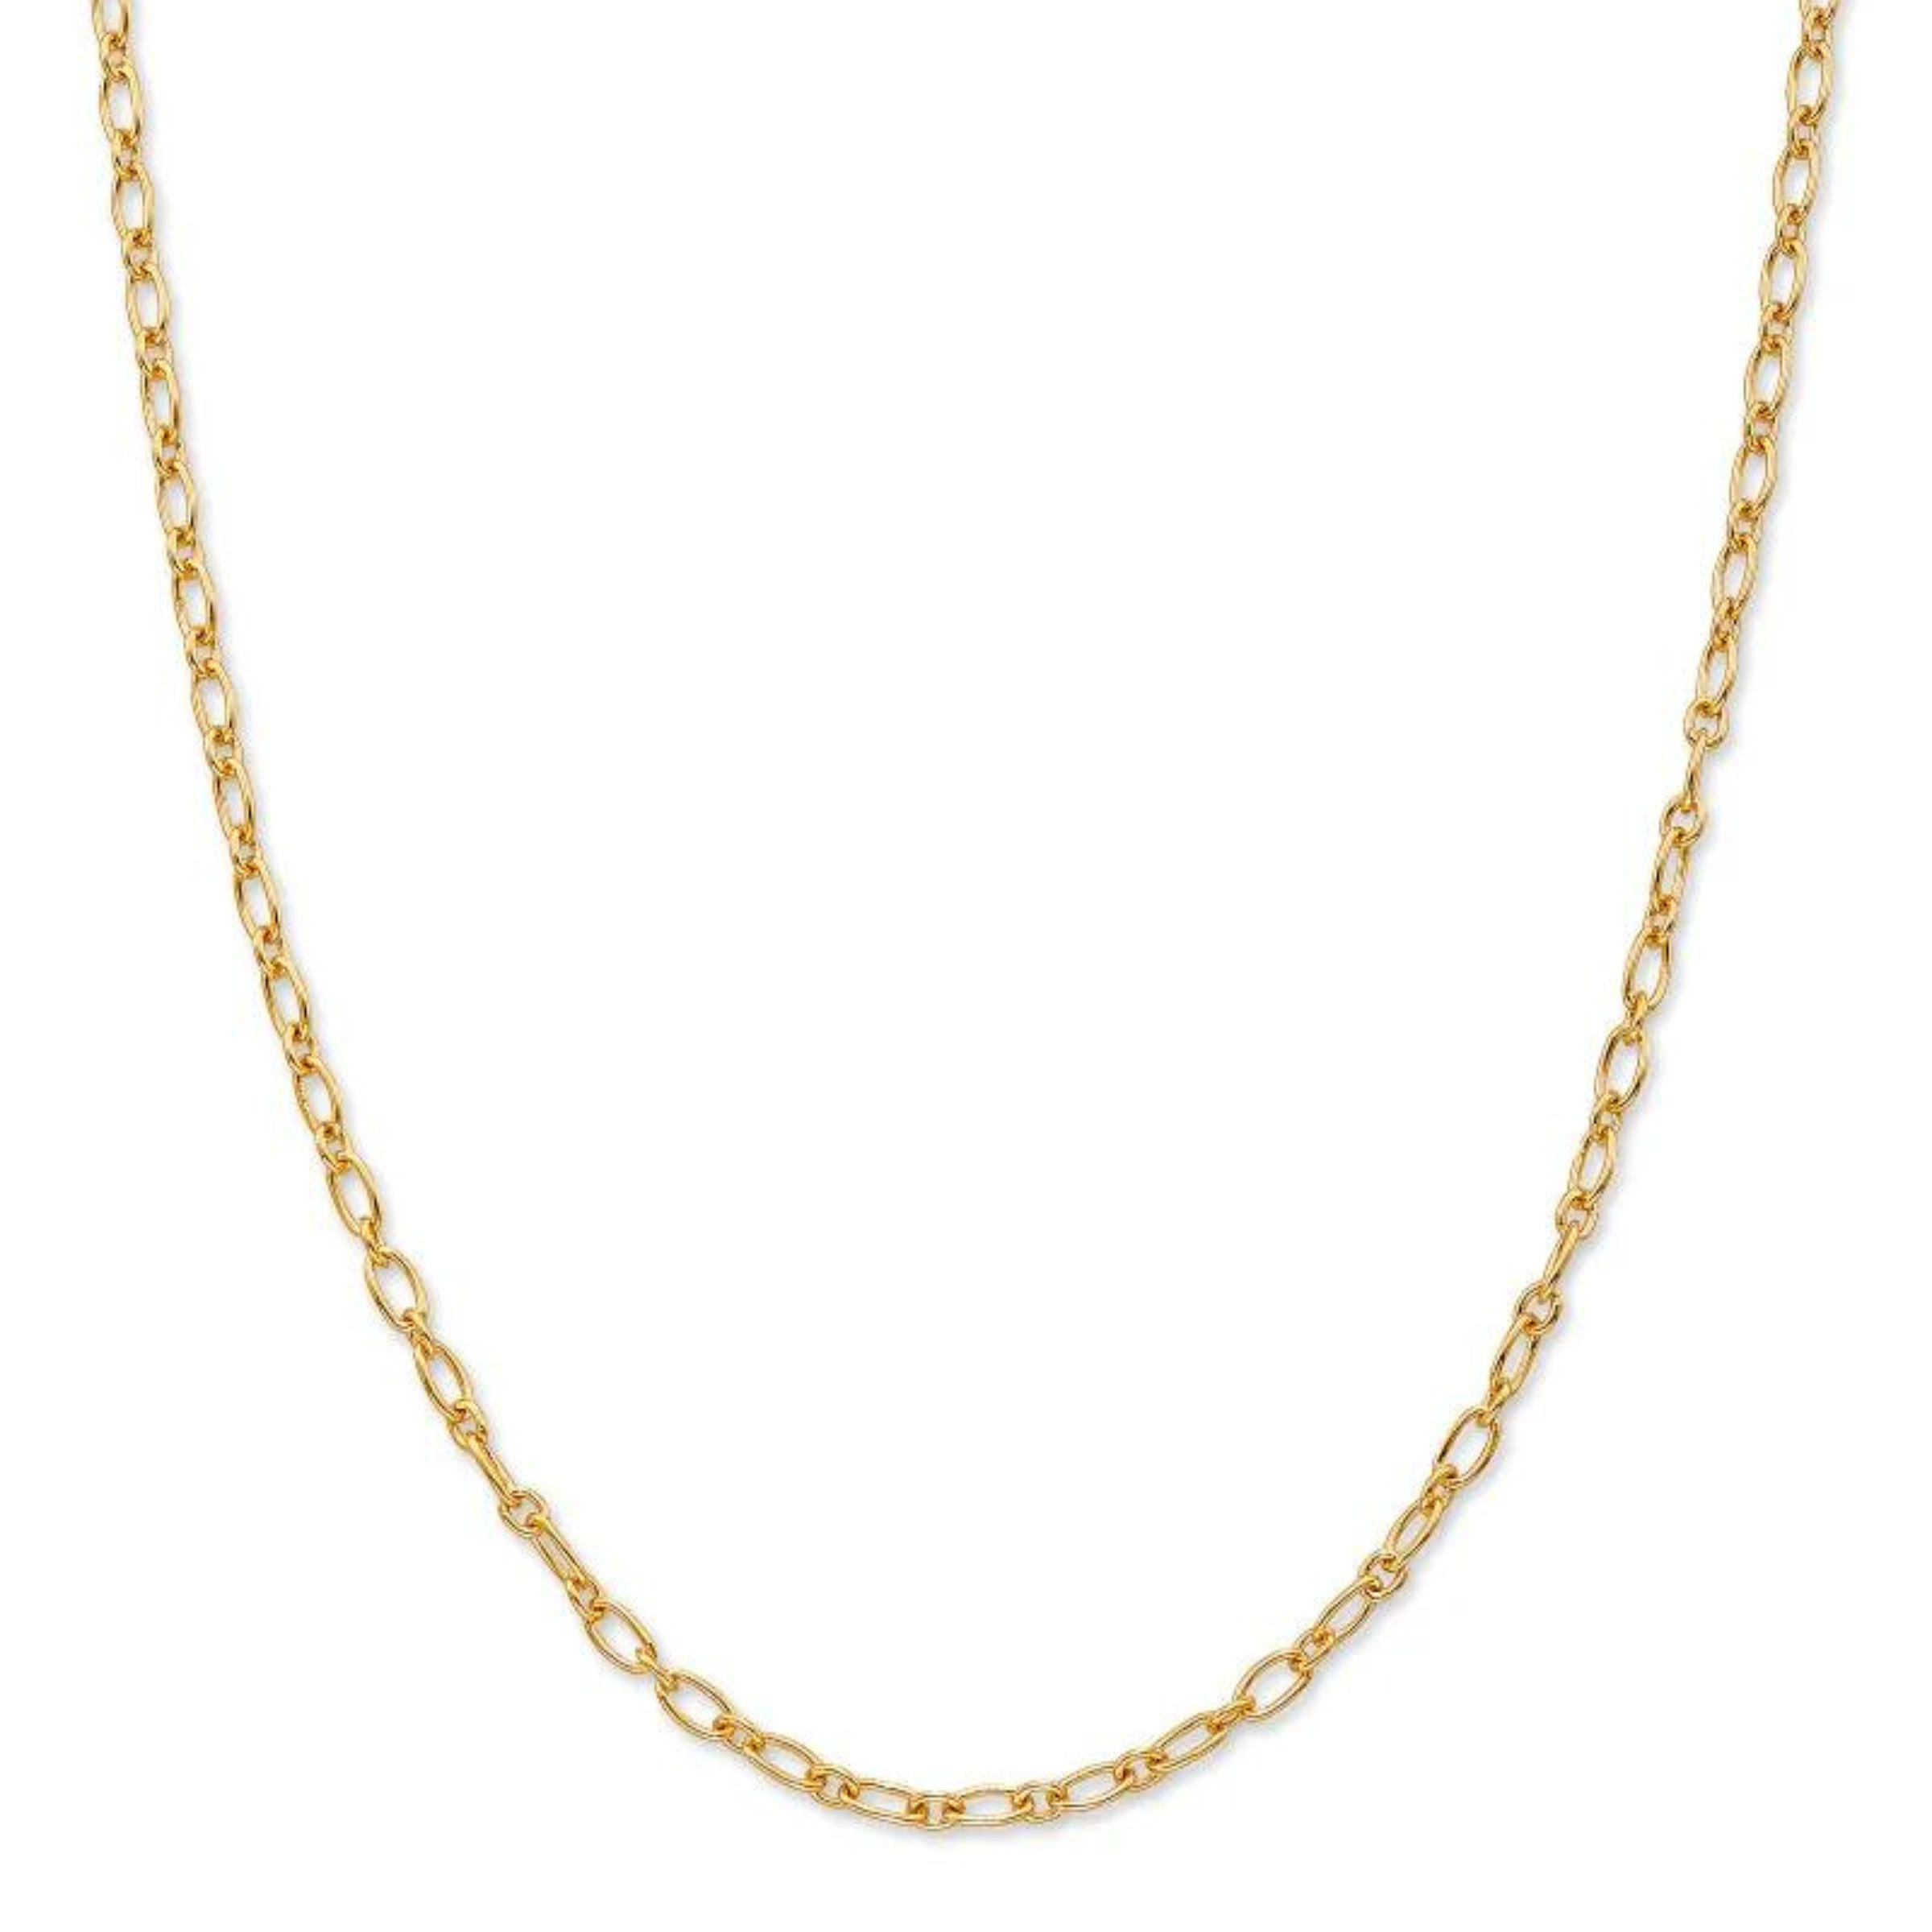 Gold, rolo chain necklace pictured on a white background.